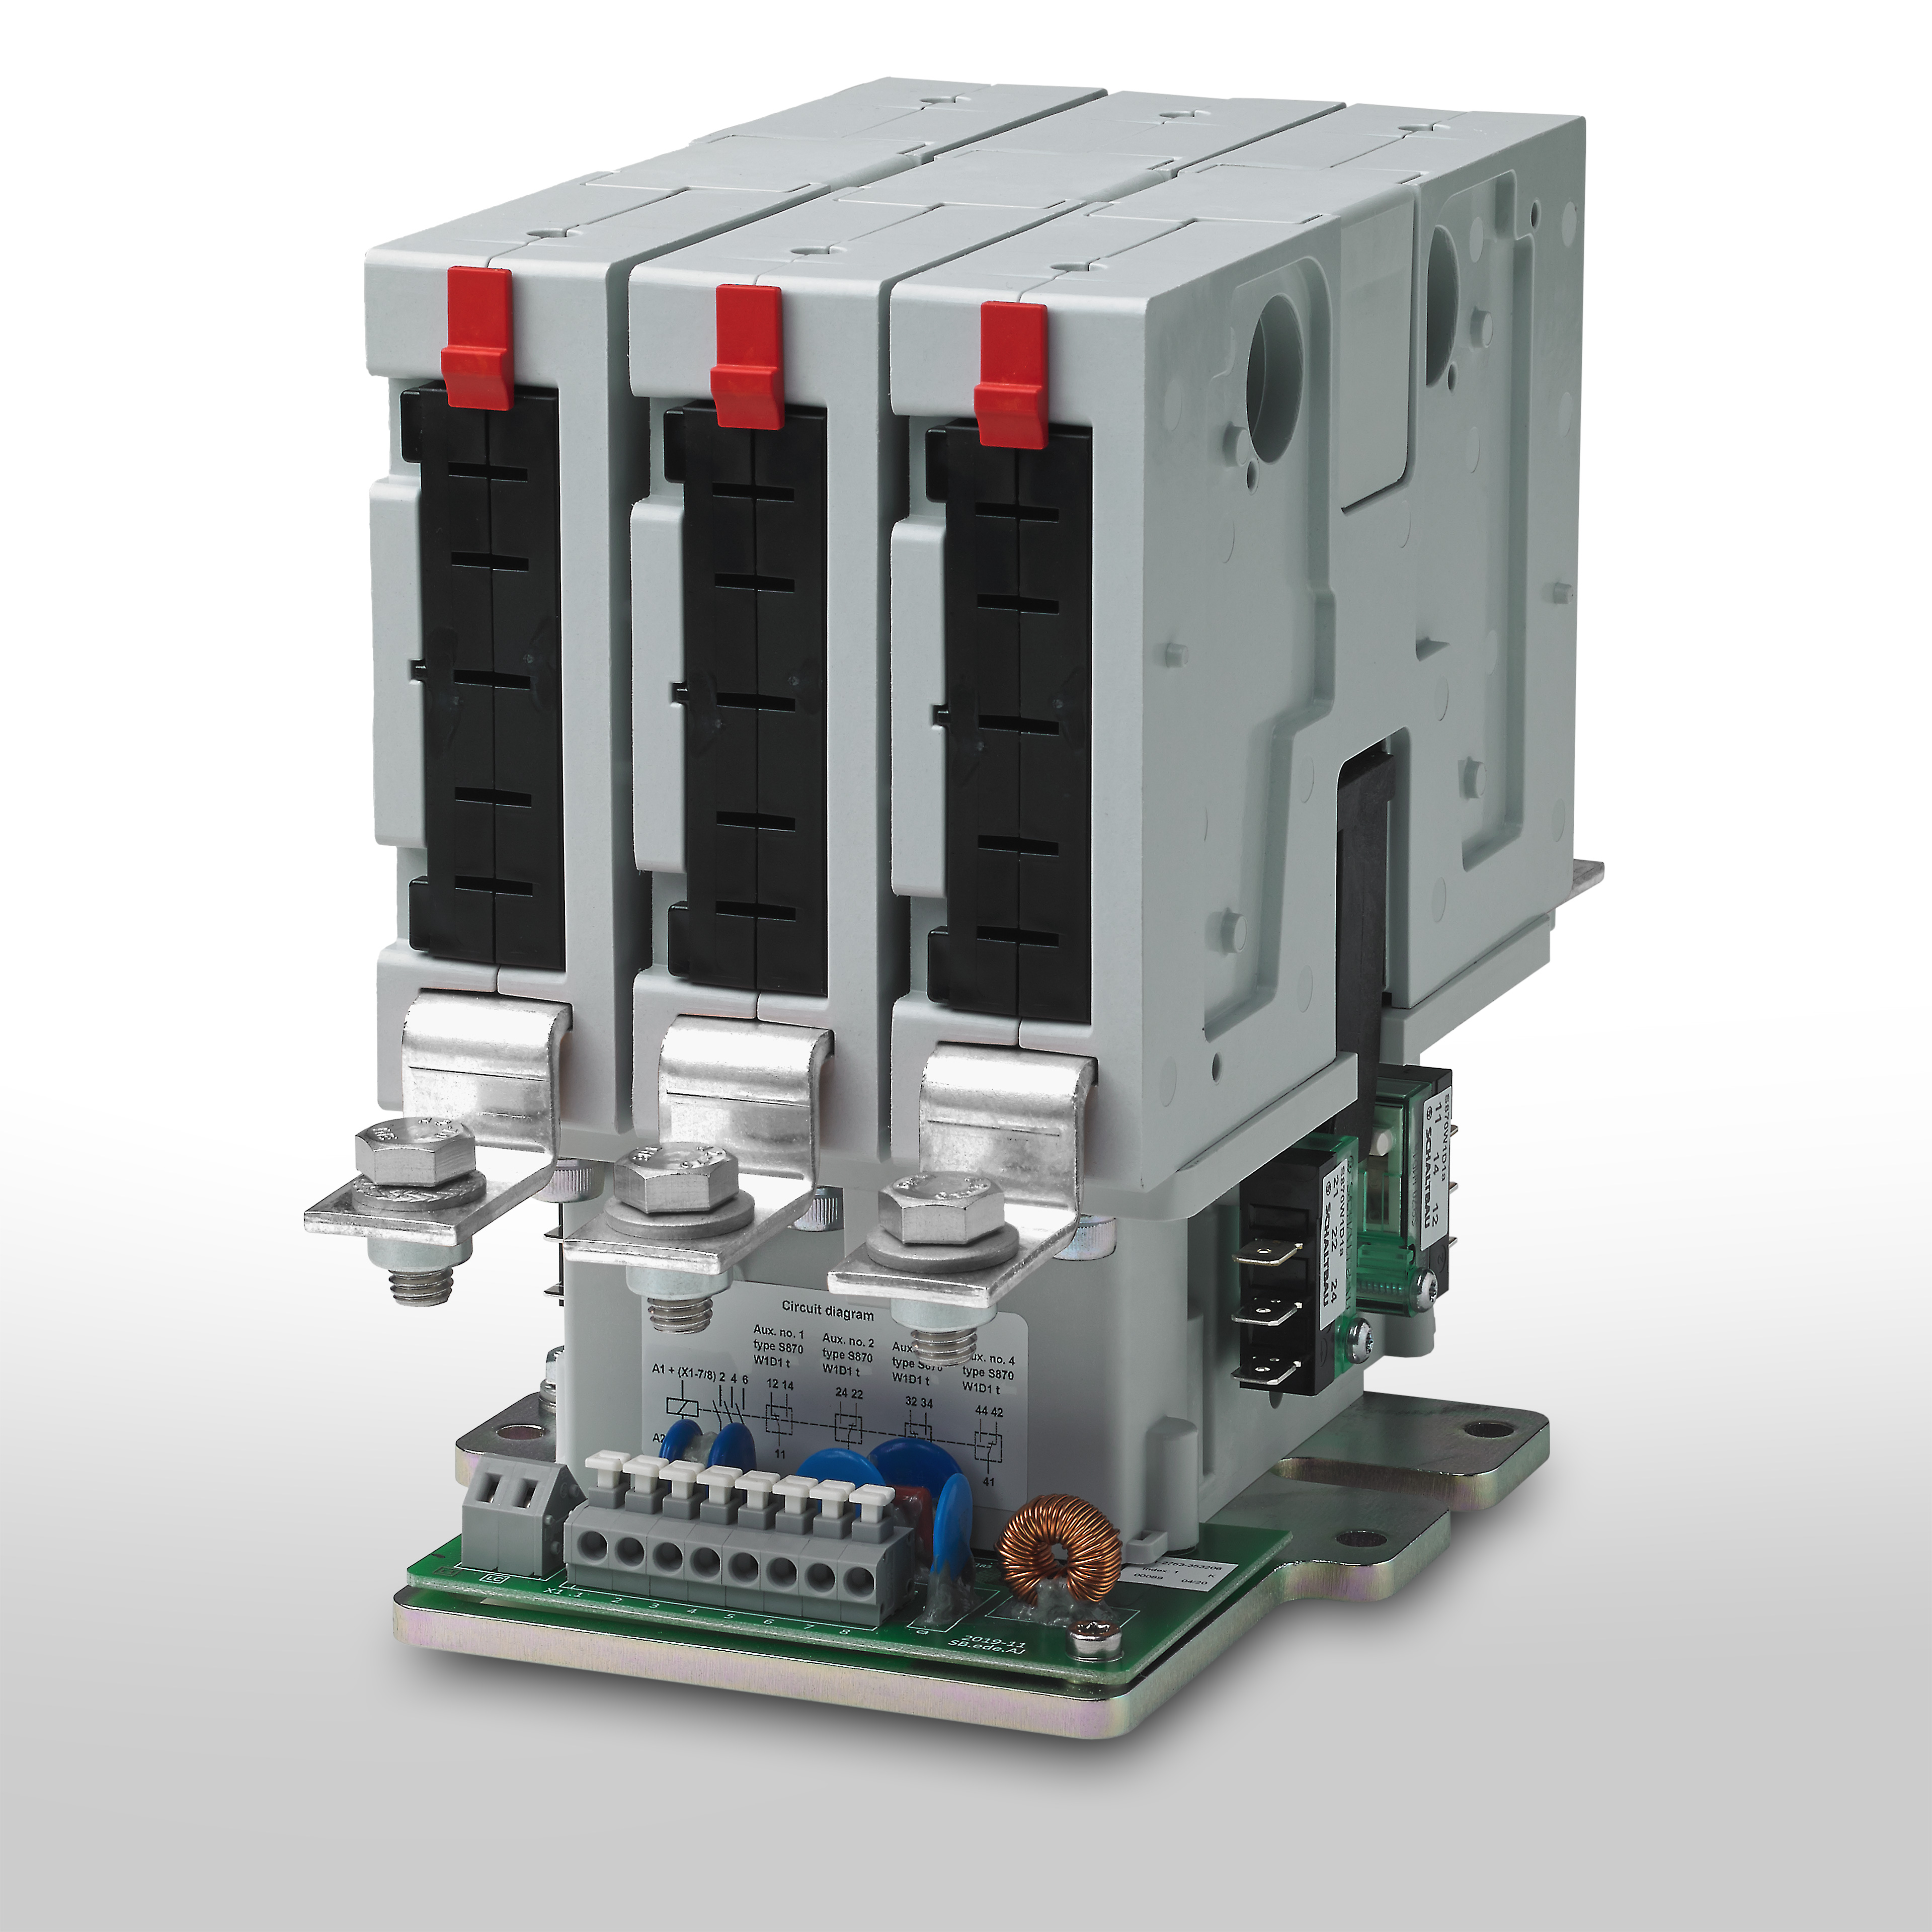 CF – Multipole AC power contactors for loads up to 600 A and 3000 V